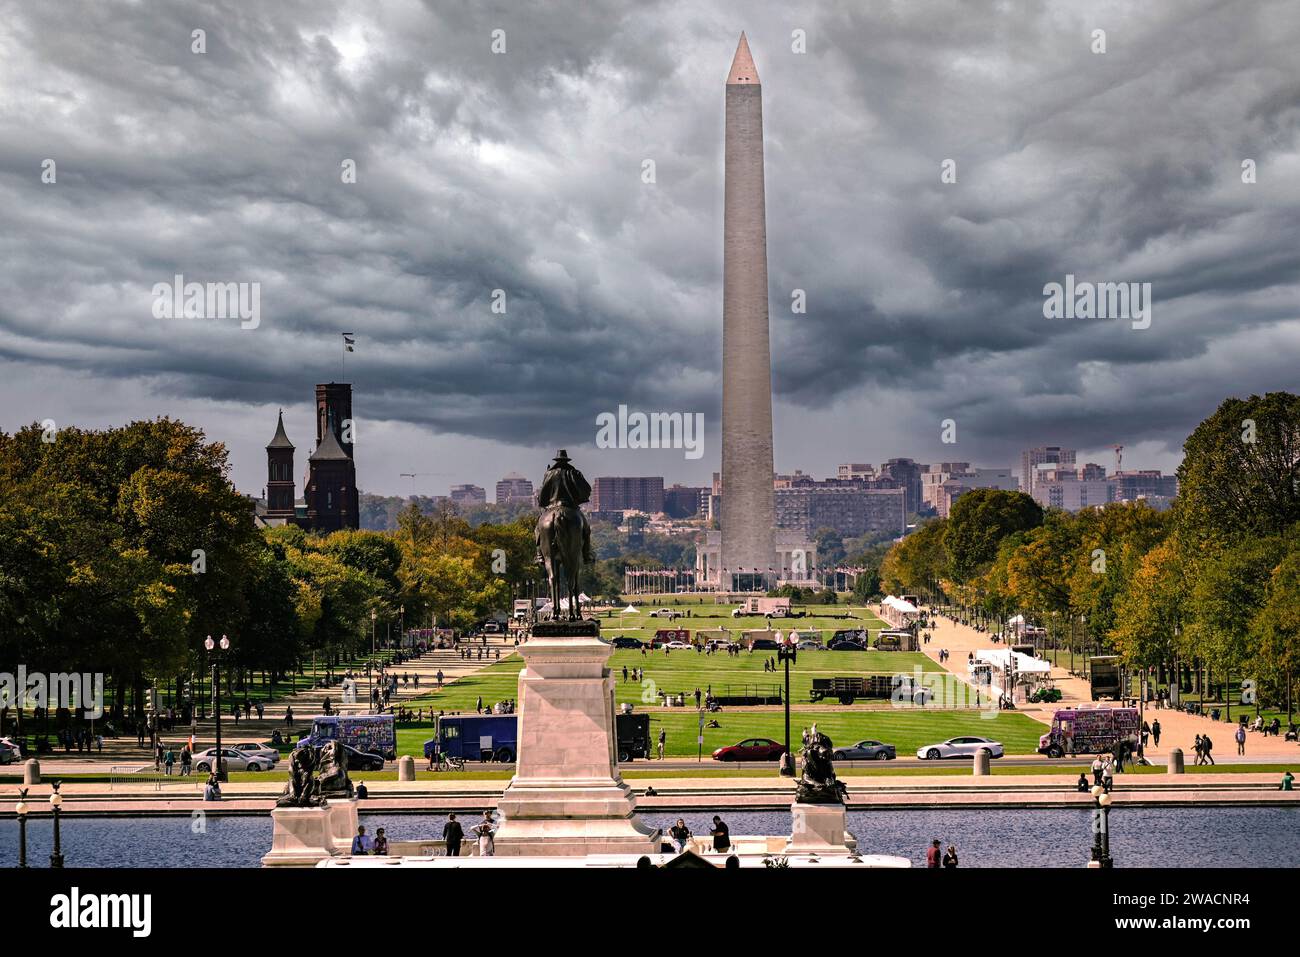 View of the Mall looking towards the Washington Monument  under stormy skies with statues and tourists, the old Smithsonian building and food trucks i Stock Photo